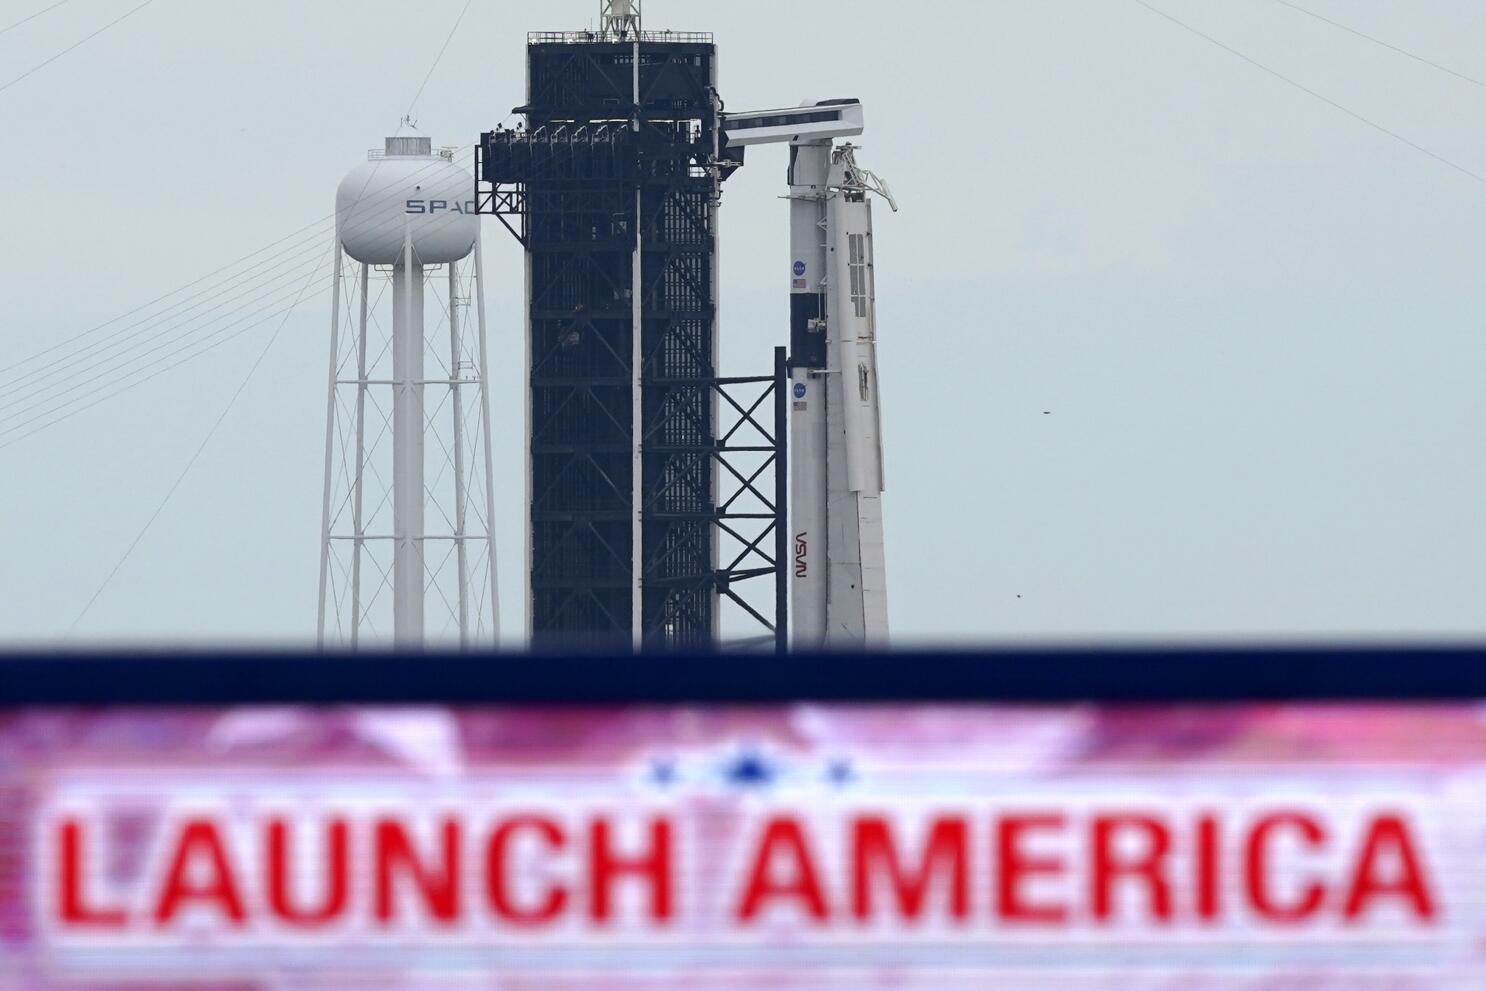 Rocket Report: NASA boosts commercial launch, another Chinese Falcon 9?